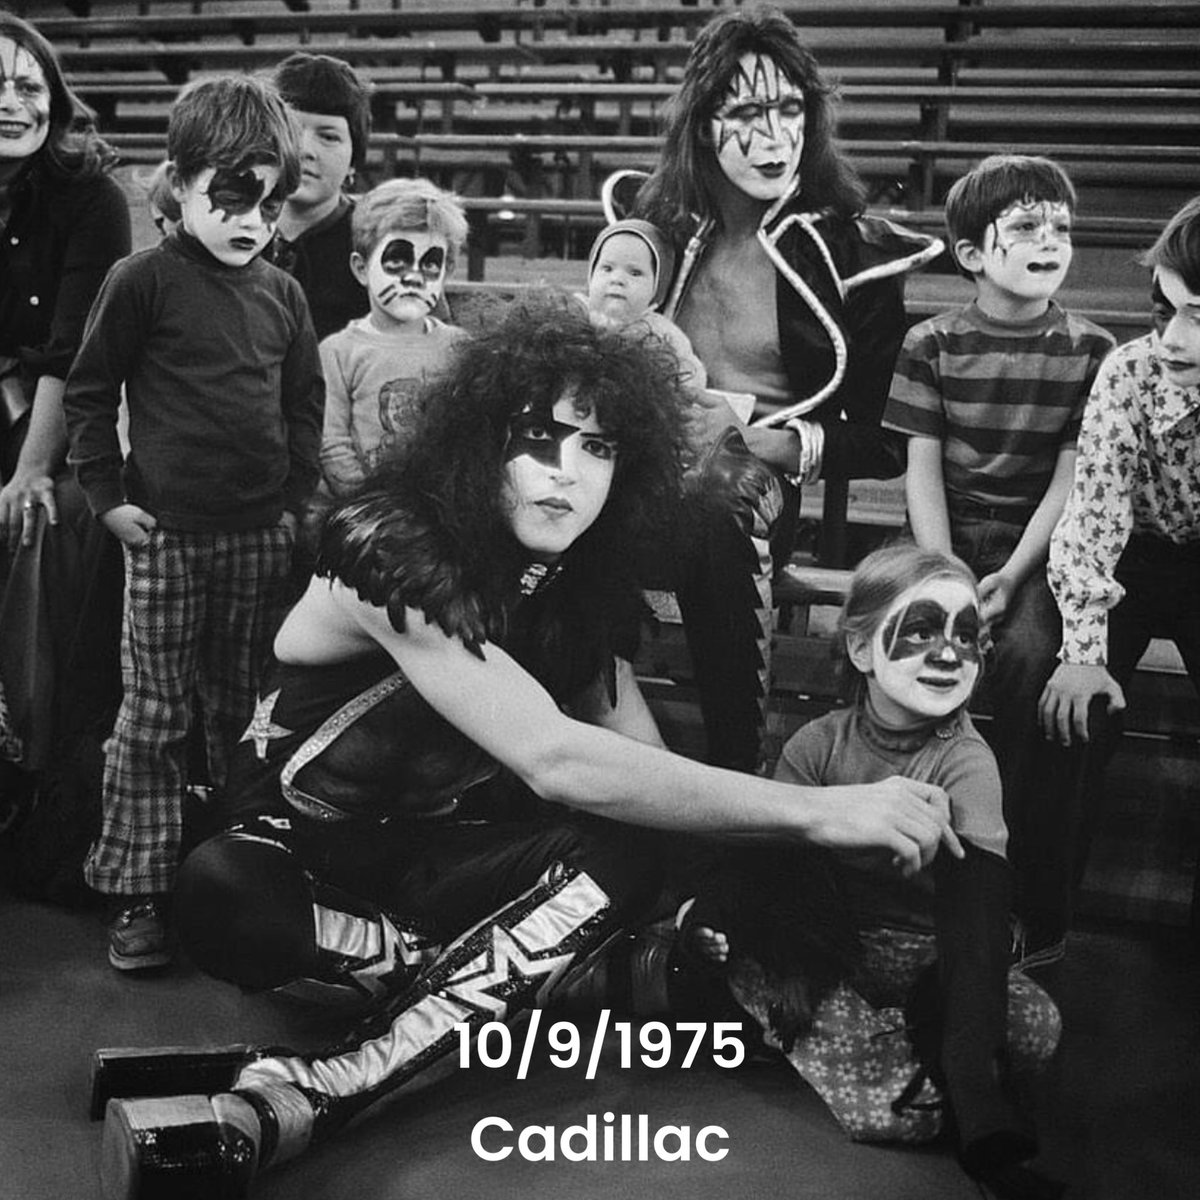 #KISStory: Cadillac, Michigan. As legend GOES…the little girl’s makeup job -(Paul is interacting with ) WAS the future pattern for 🦊 #TheFox #EricCarr’s makeup design. 
#KissNation
#Kiss50